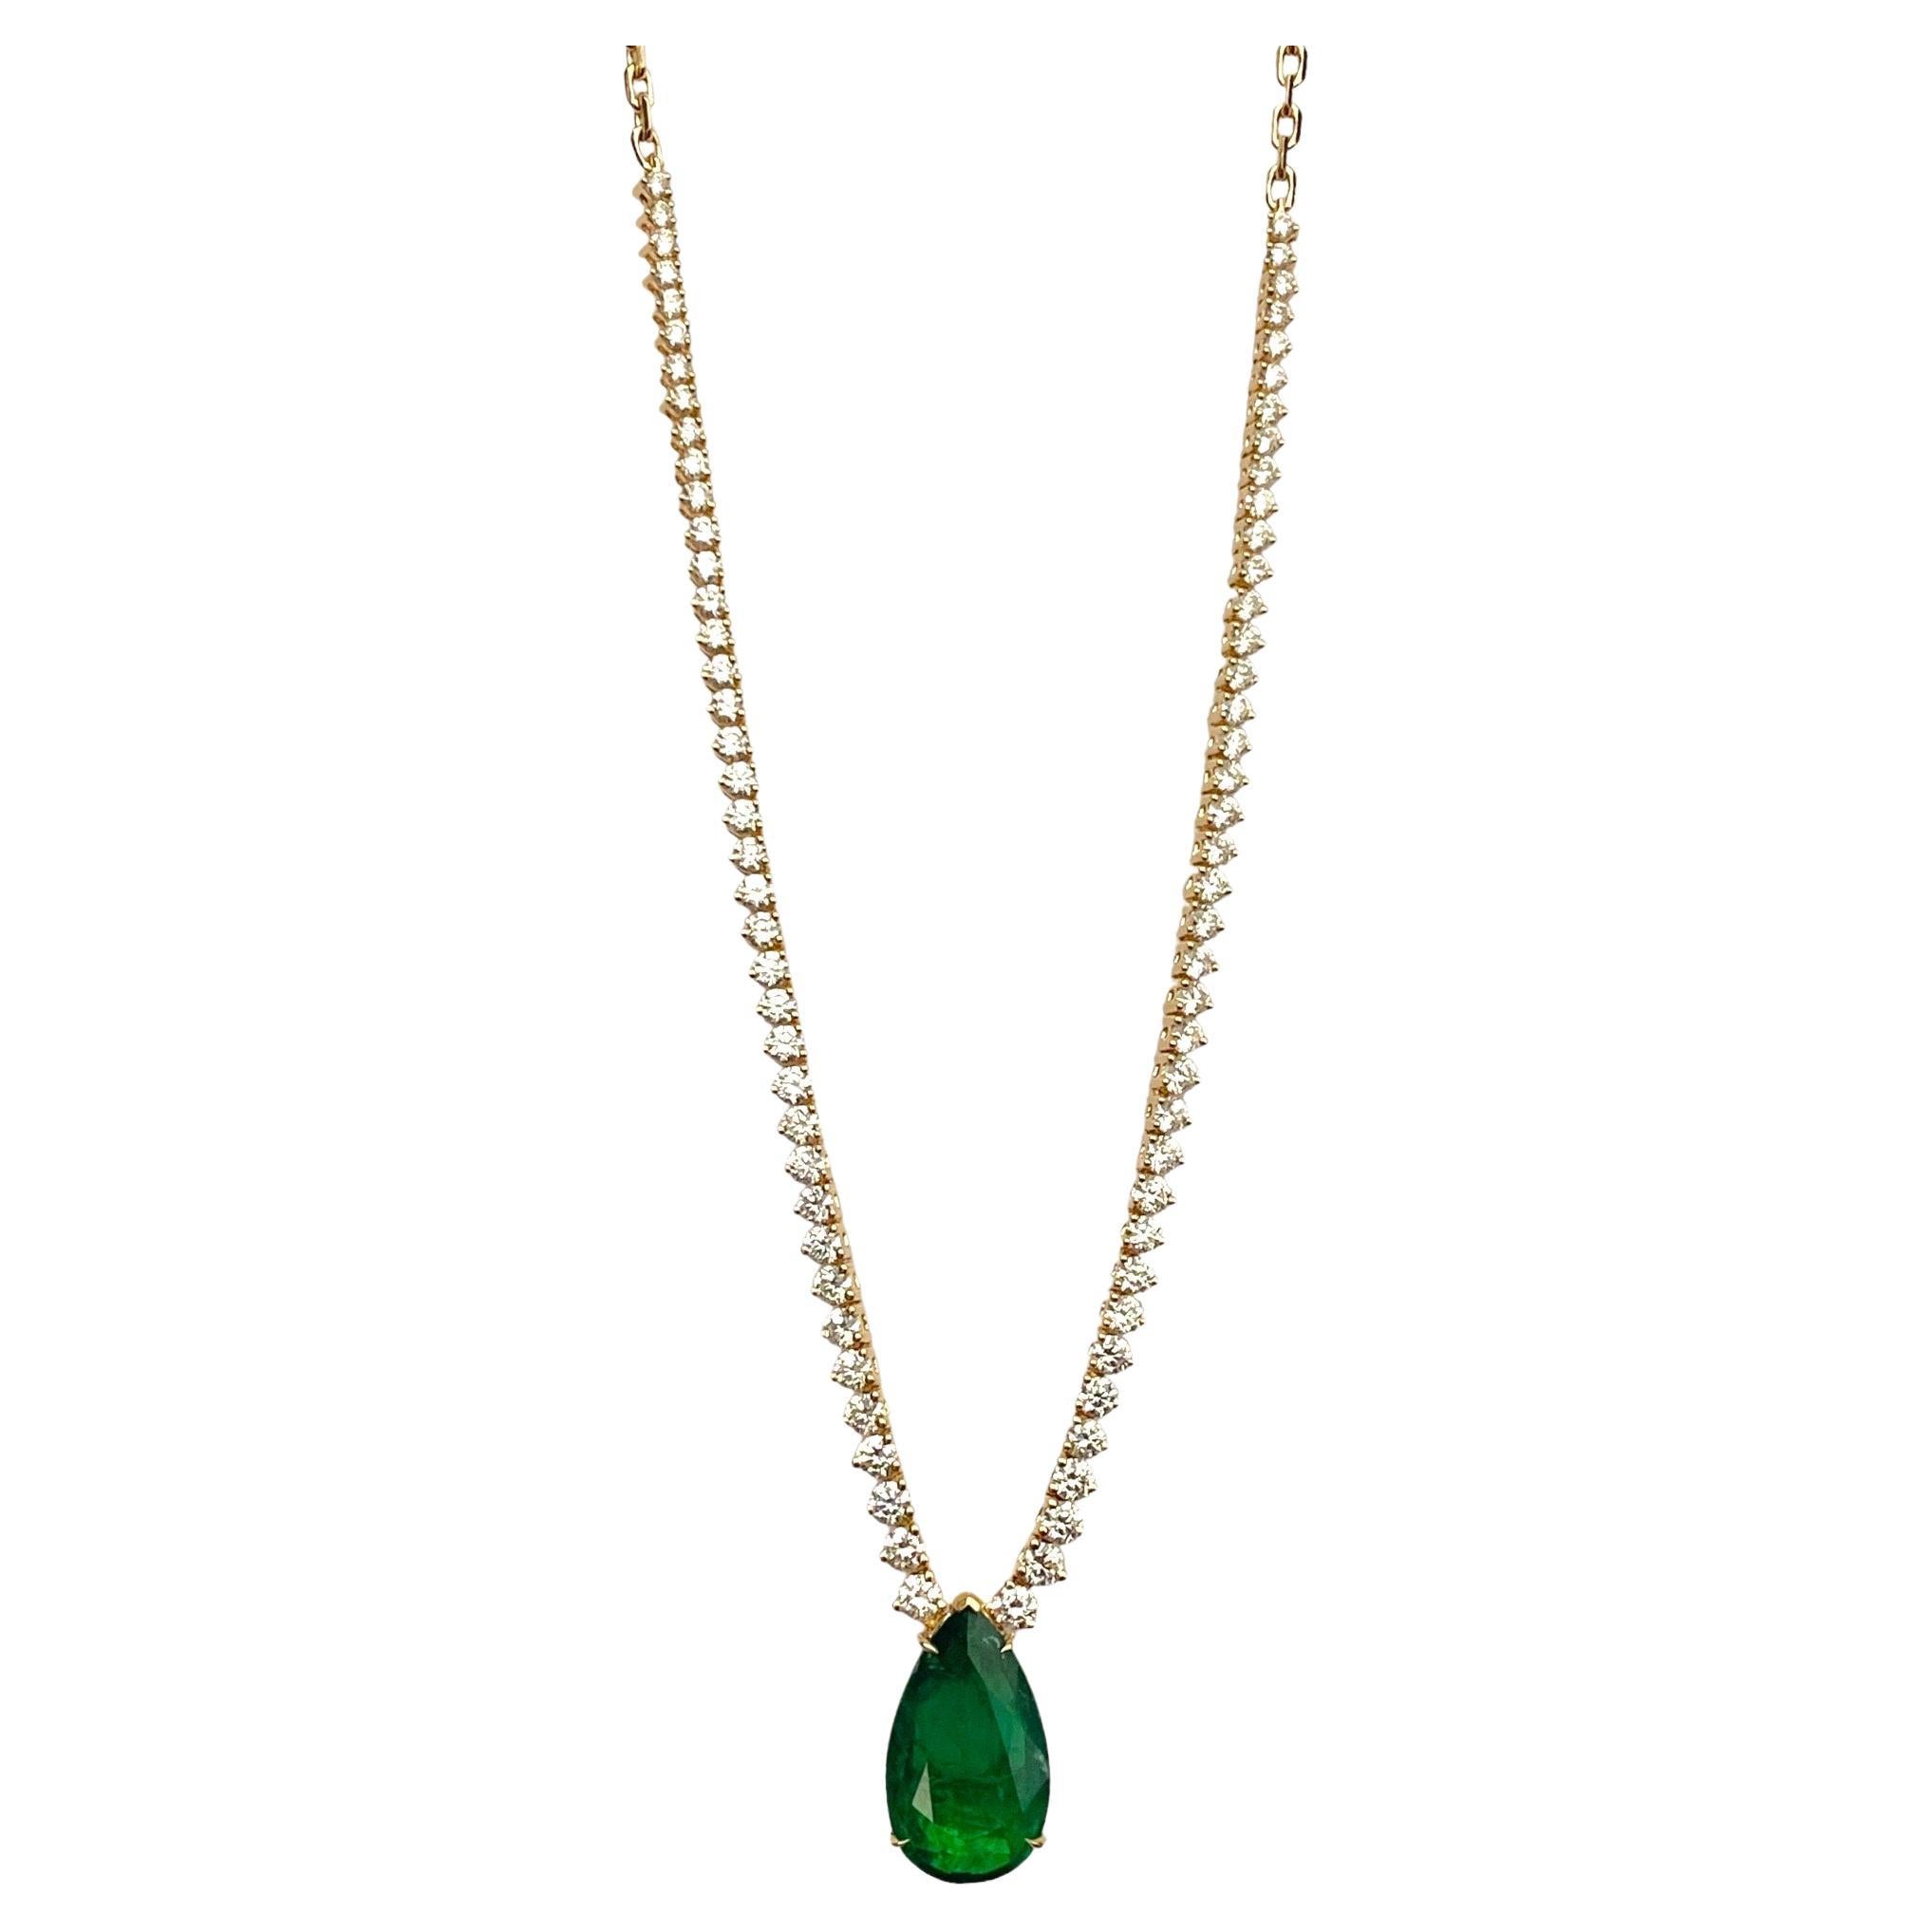 Statement 7.3 ct Pear shaped Emerald and Graduated Diamond Necklace For Sale